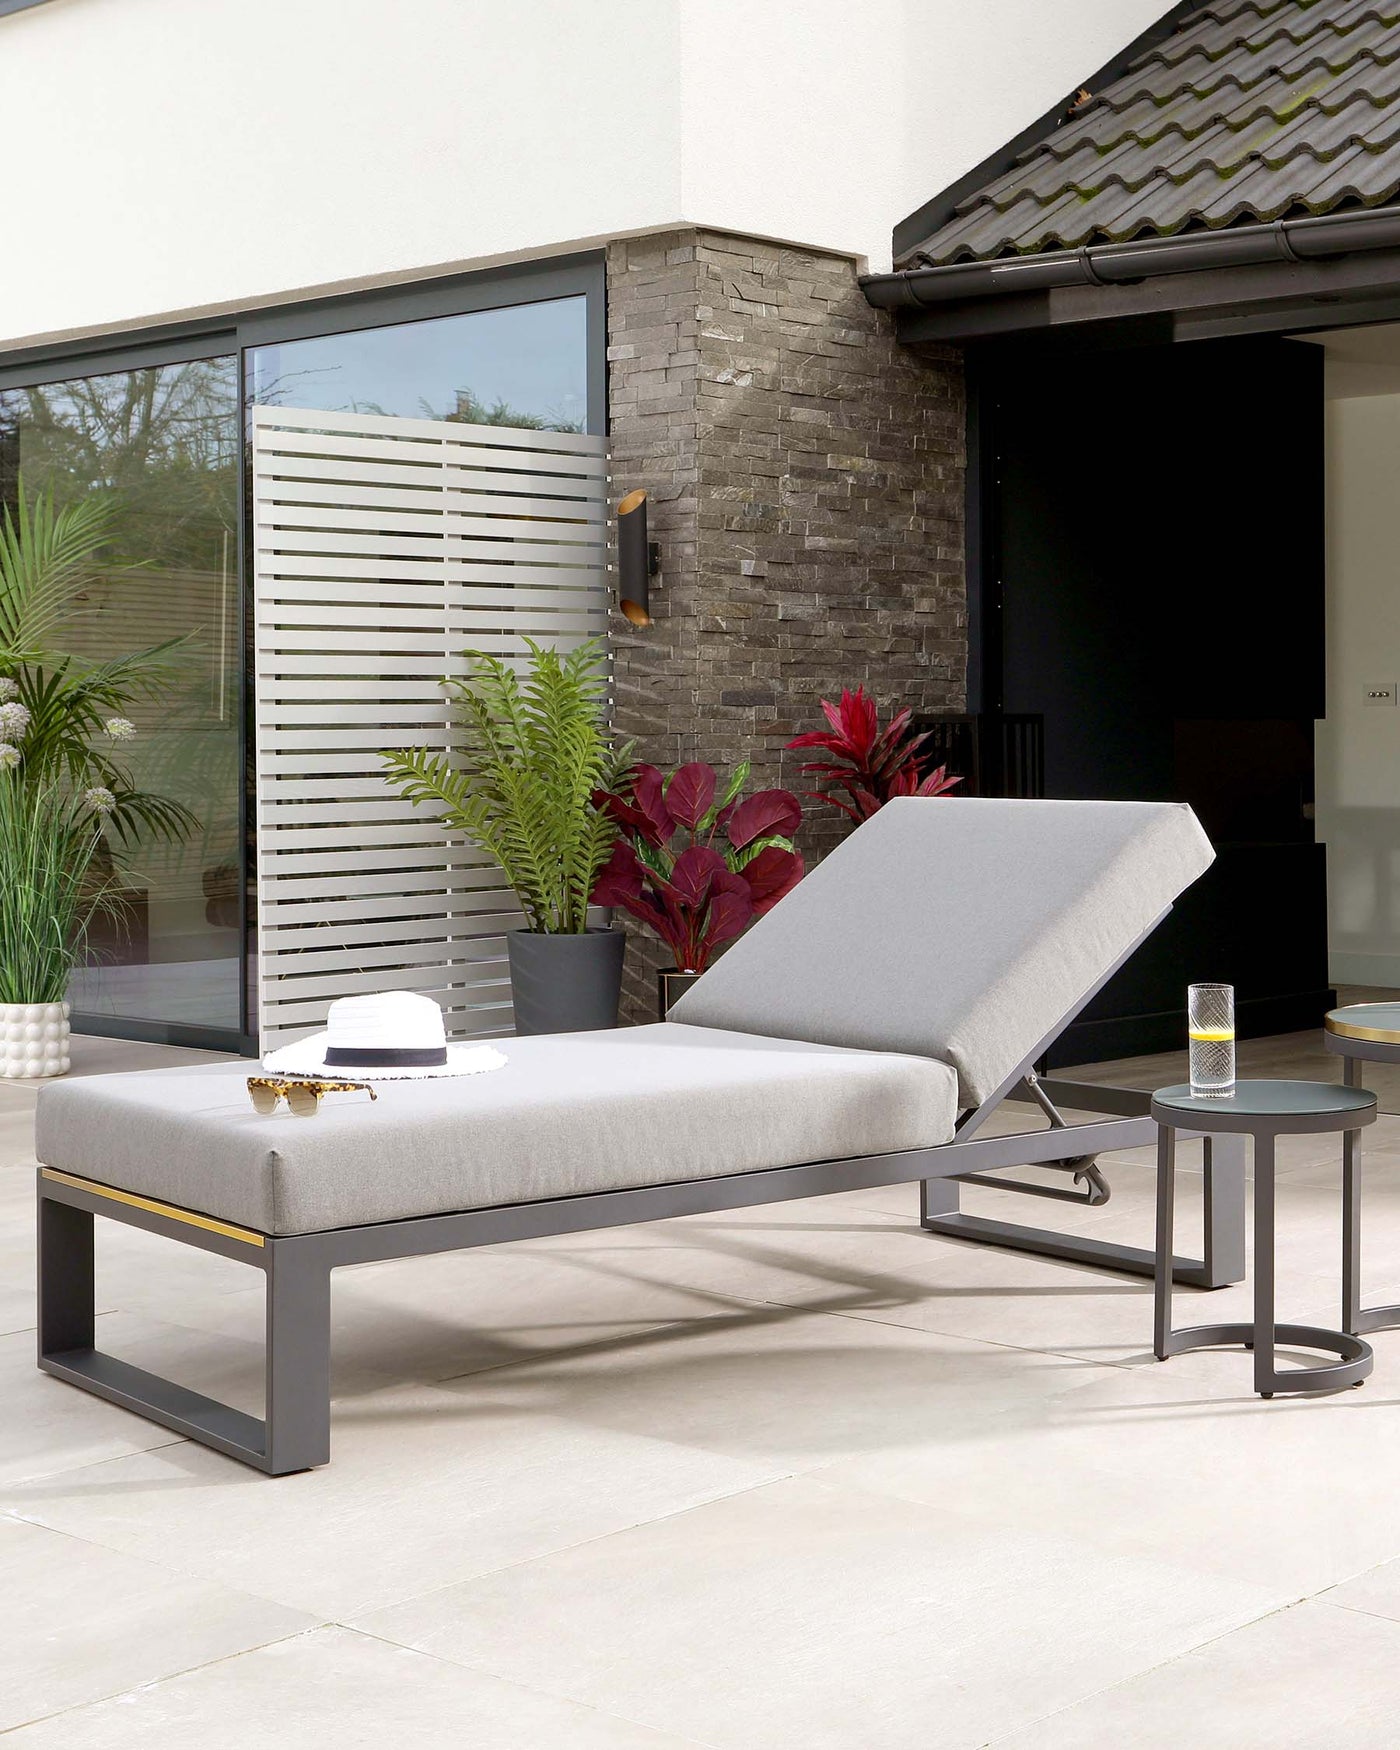 Modern outdoor furniture set featuring a sleek, adjustable chaise lounge with a matte black frame and light grey cushion, accompanied by a round, minimalistic matte black side table. The set is staged on a smooth patio surface with a contemporary backdrop of a home exterior, highlighting the furniture's suitability for upscale outdoor living spaces.